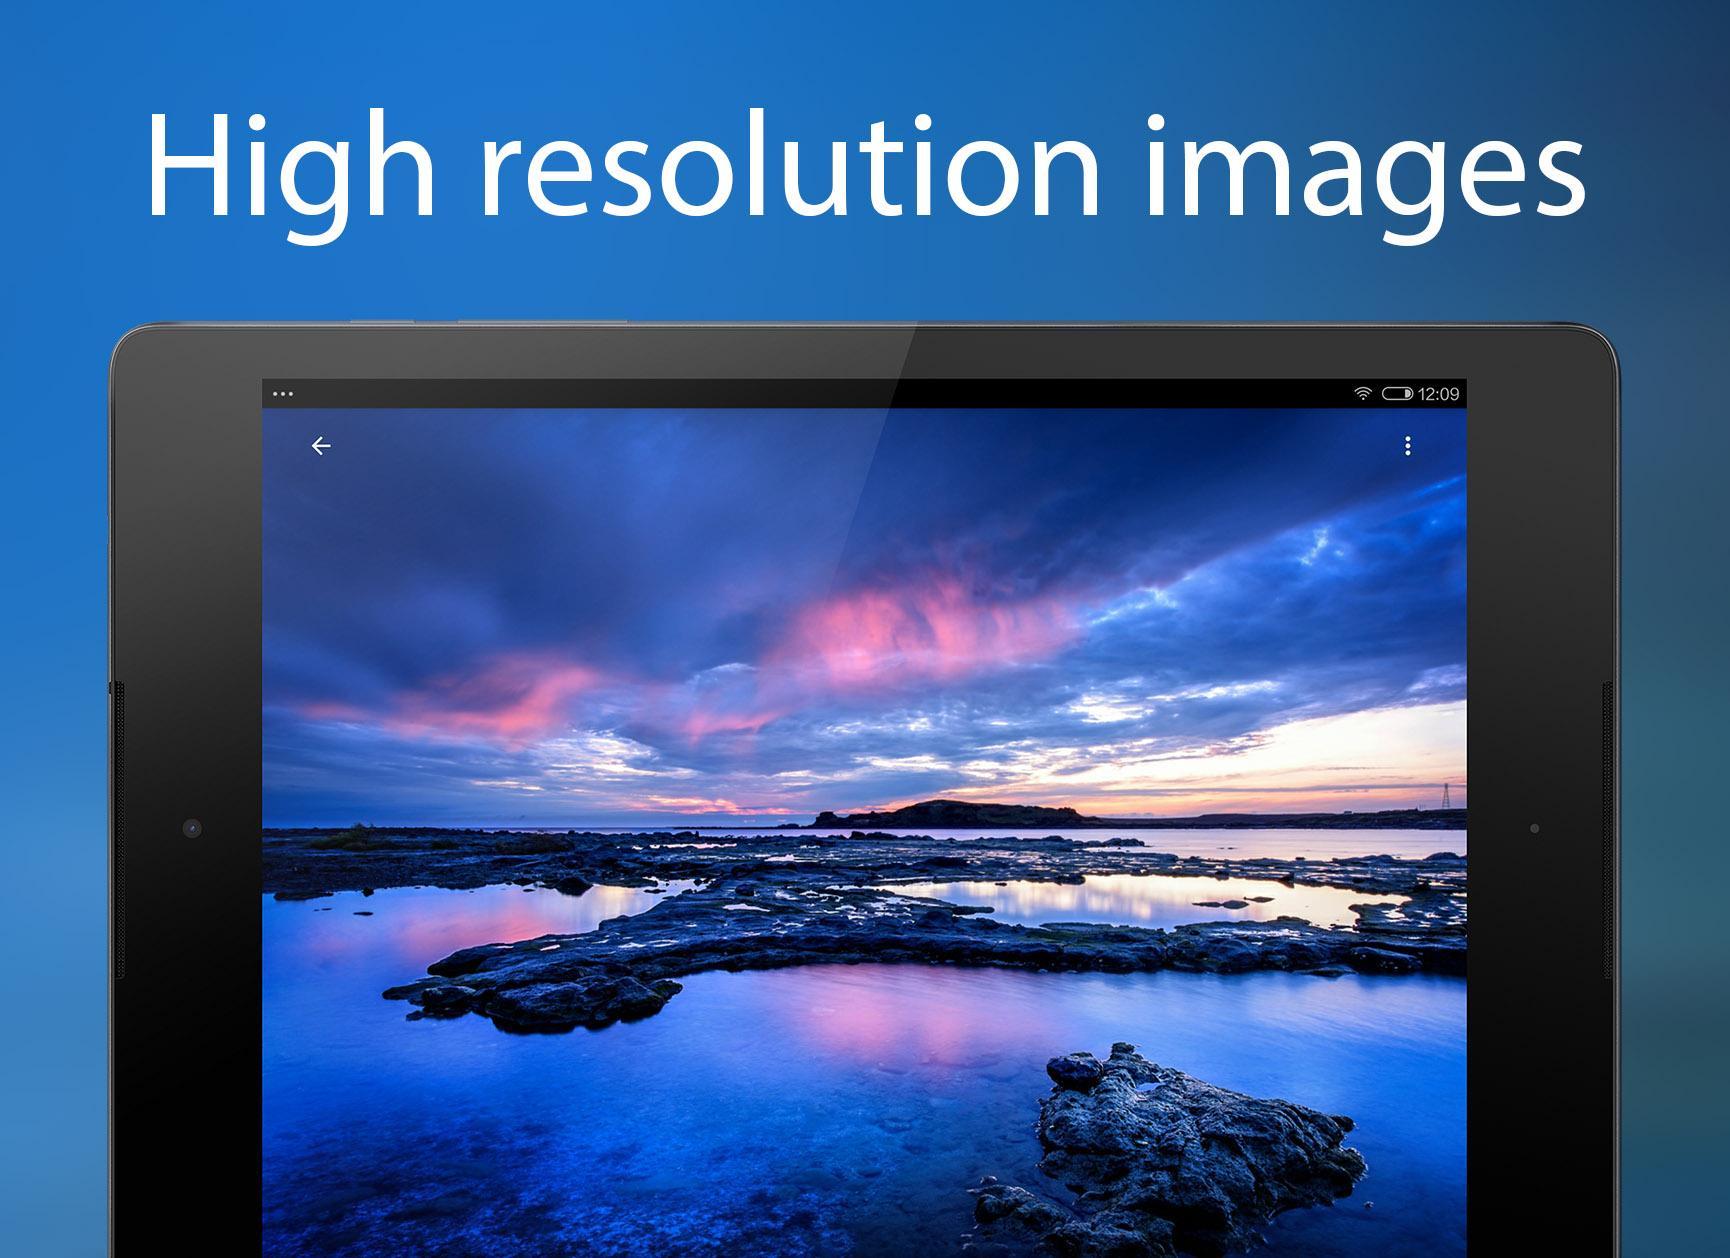  Wallpapers  HD  4K  QHD  images for Android APK  Download